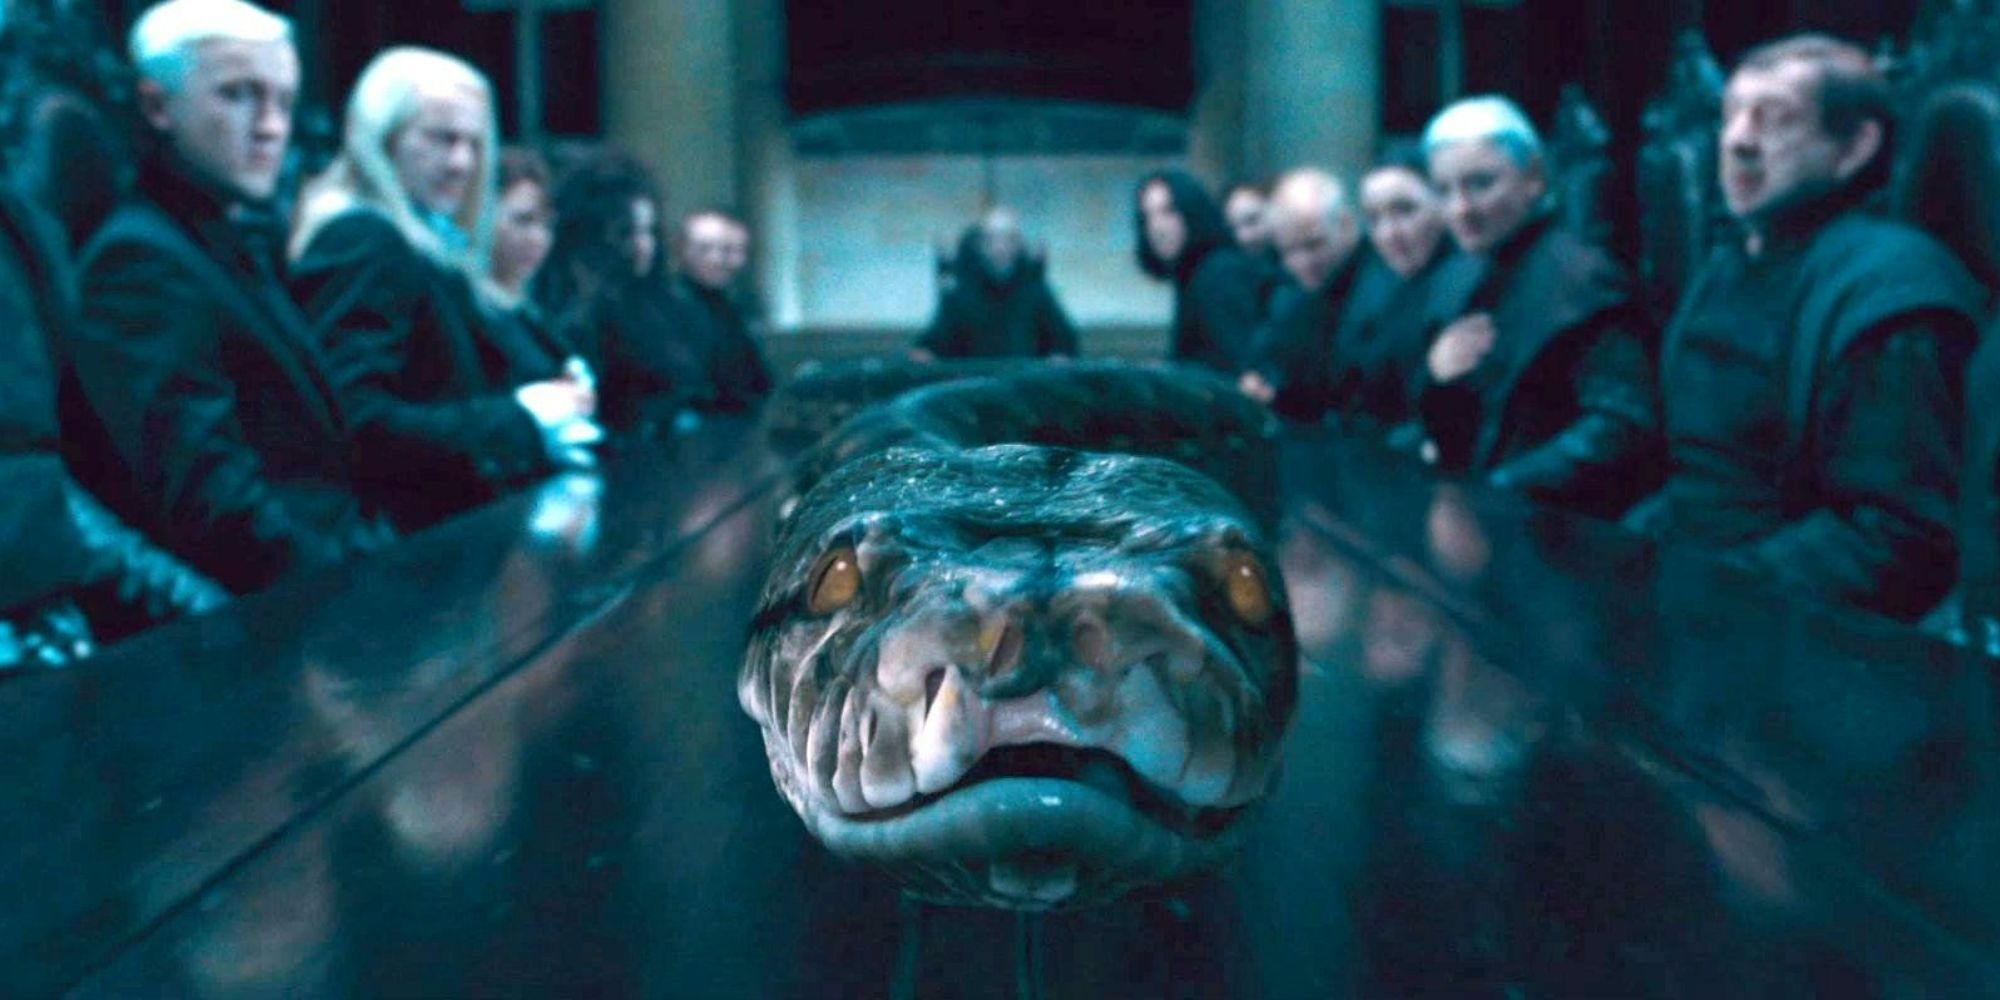 Nagini the Snake Before Killing Charity Burbage in Front of the Death Eaters in Harry Potter and the Deathly Hallows: Part 1